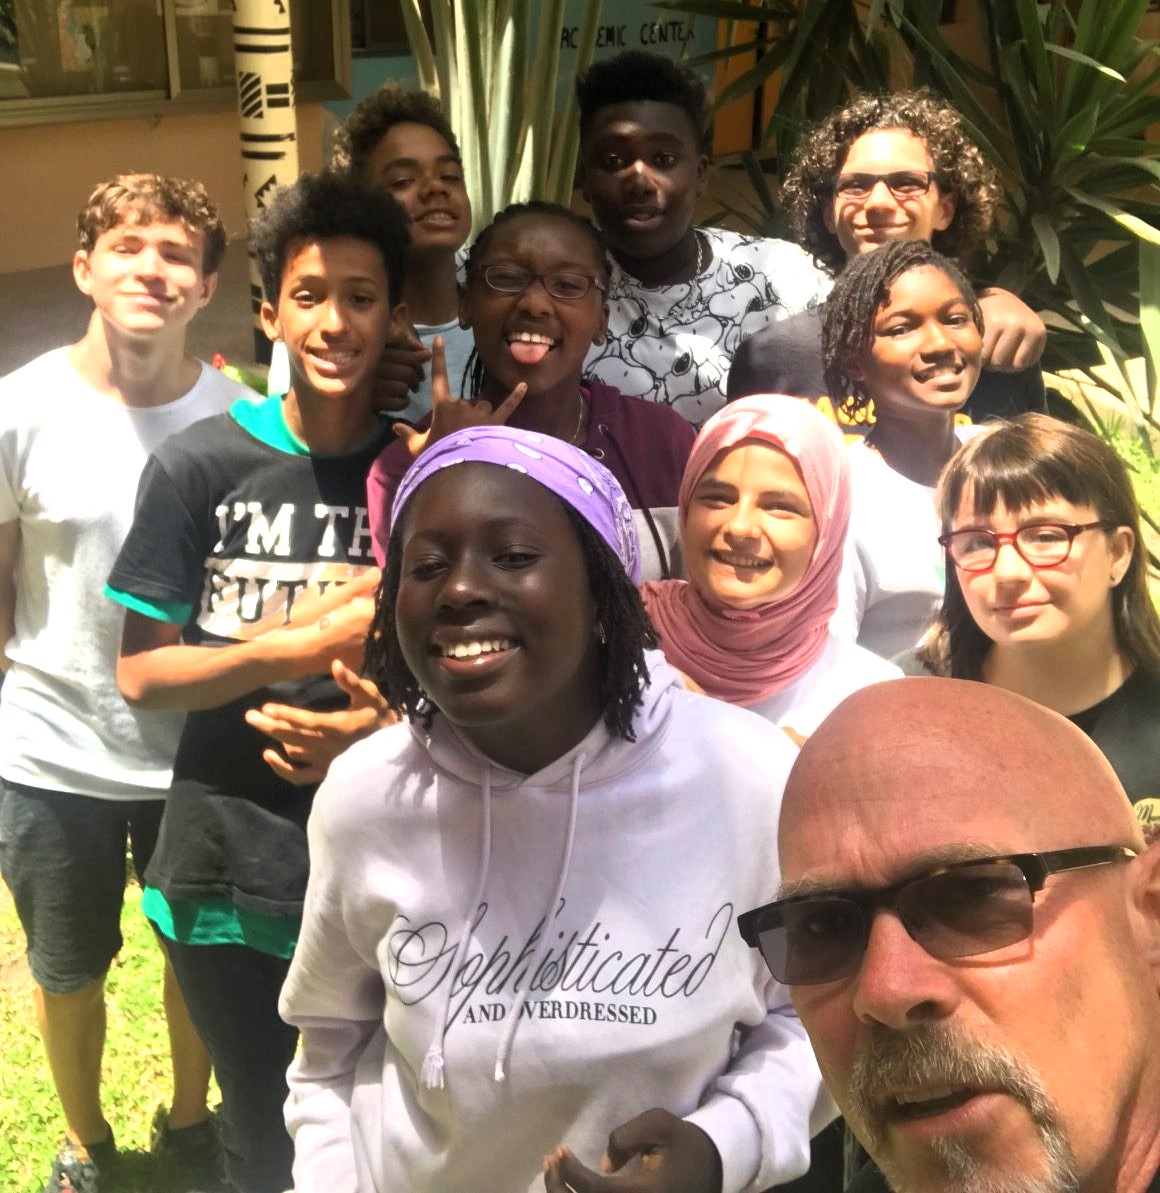 While+teaching+at+the+International+School+of+Dakar+school+in+Senegal%2C+Mr.+Johnson+enjoys+time+outside+with+his+students.+Photo+courtesy+of+Mr.+Johnson